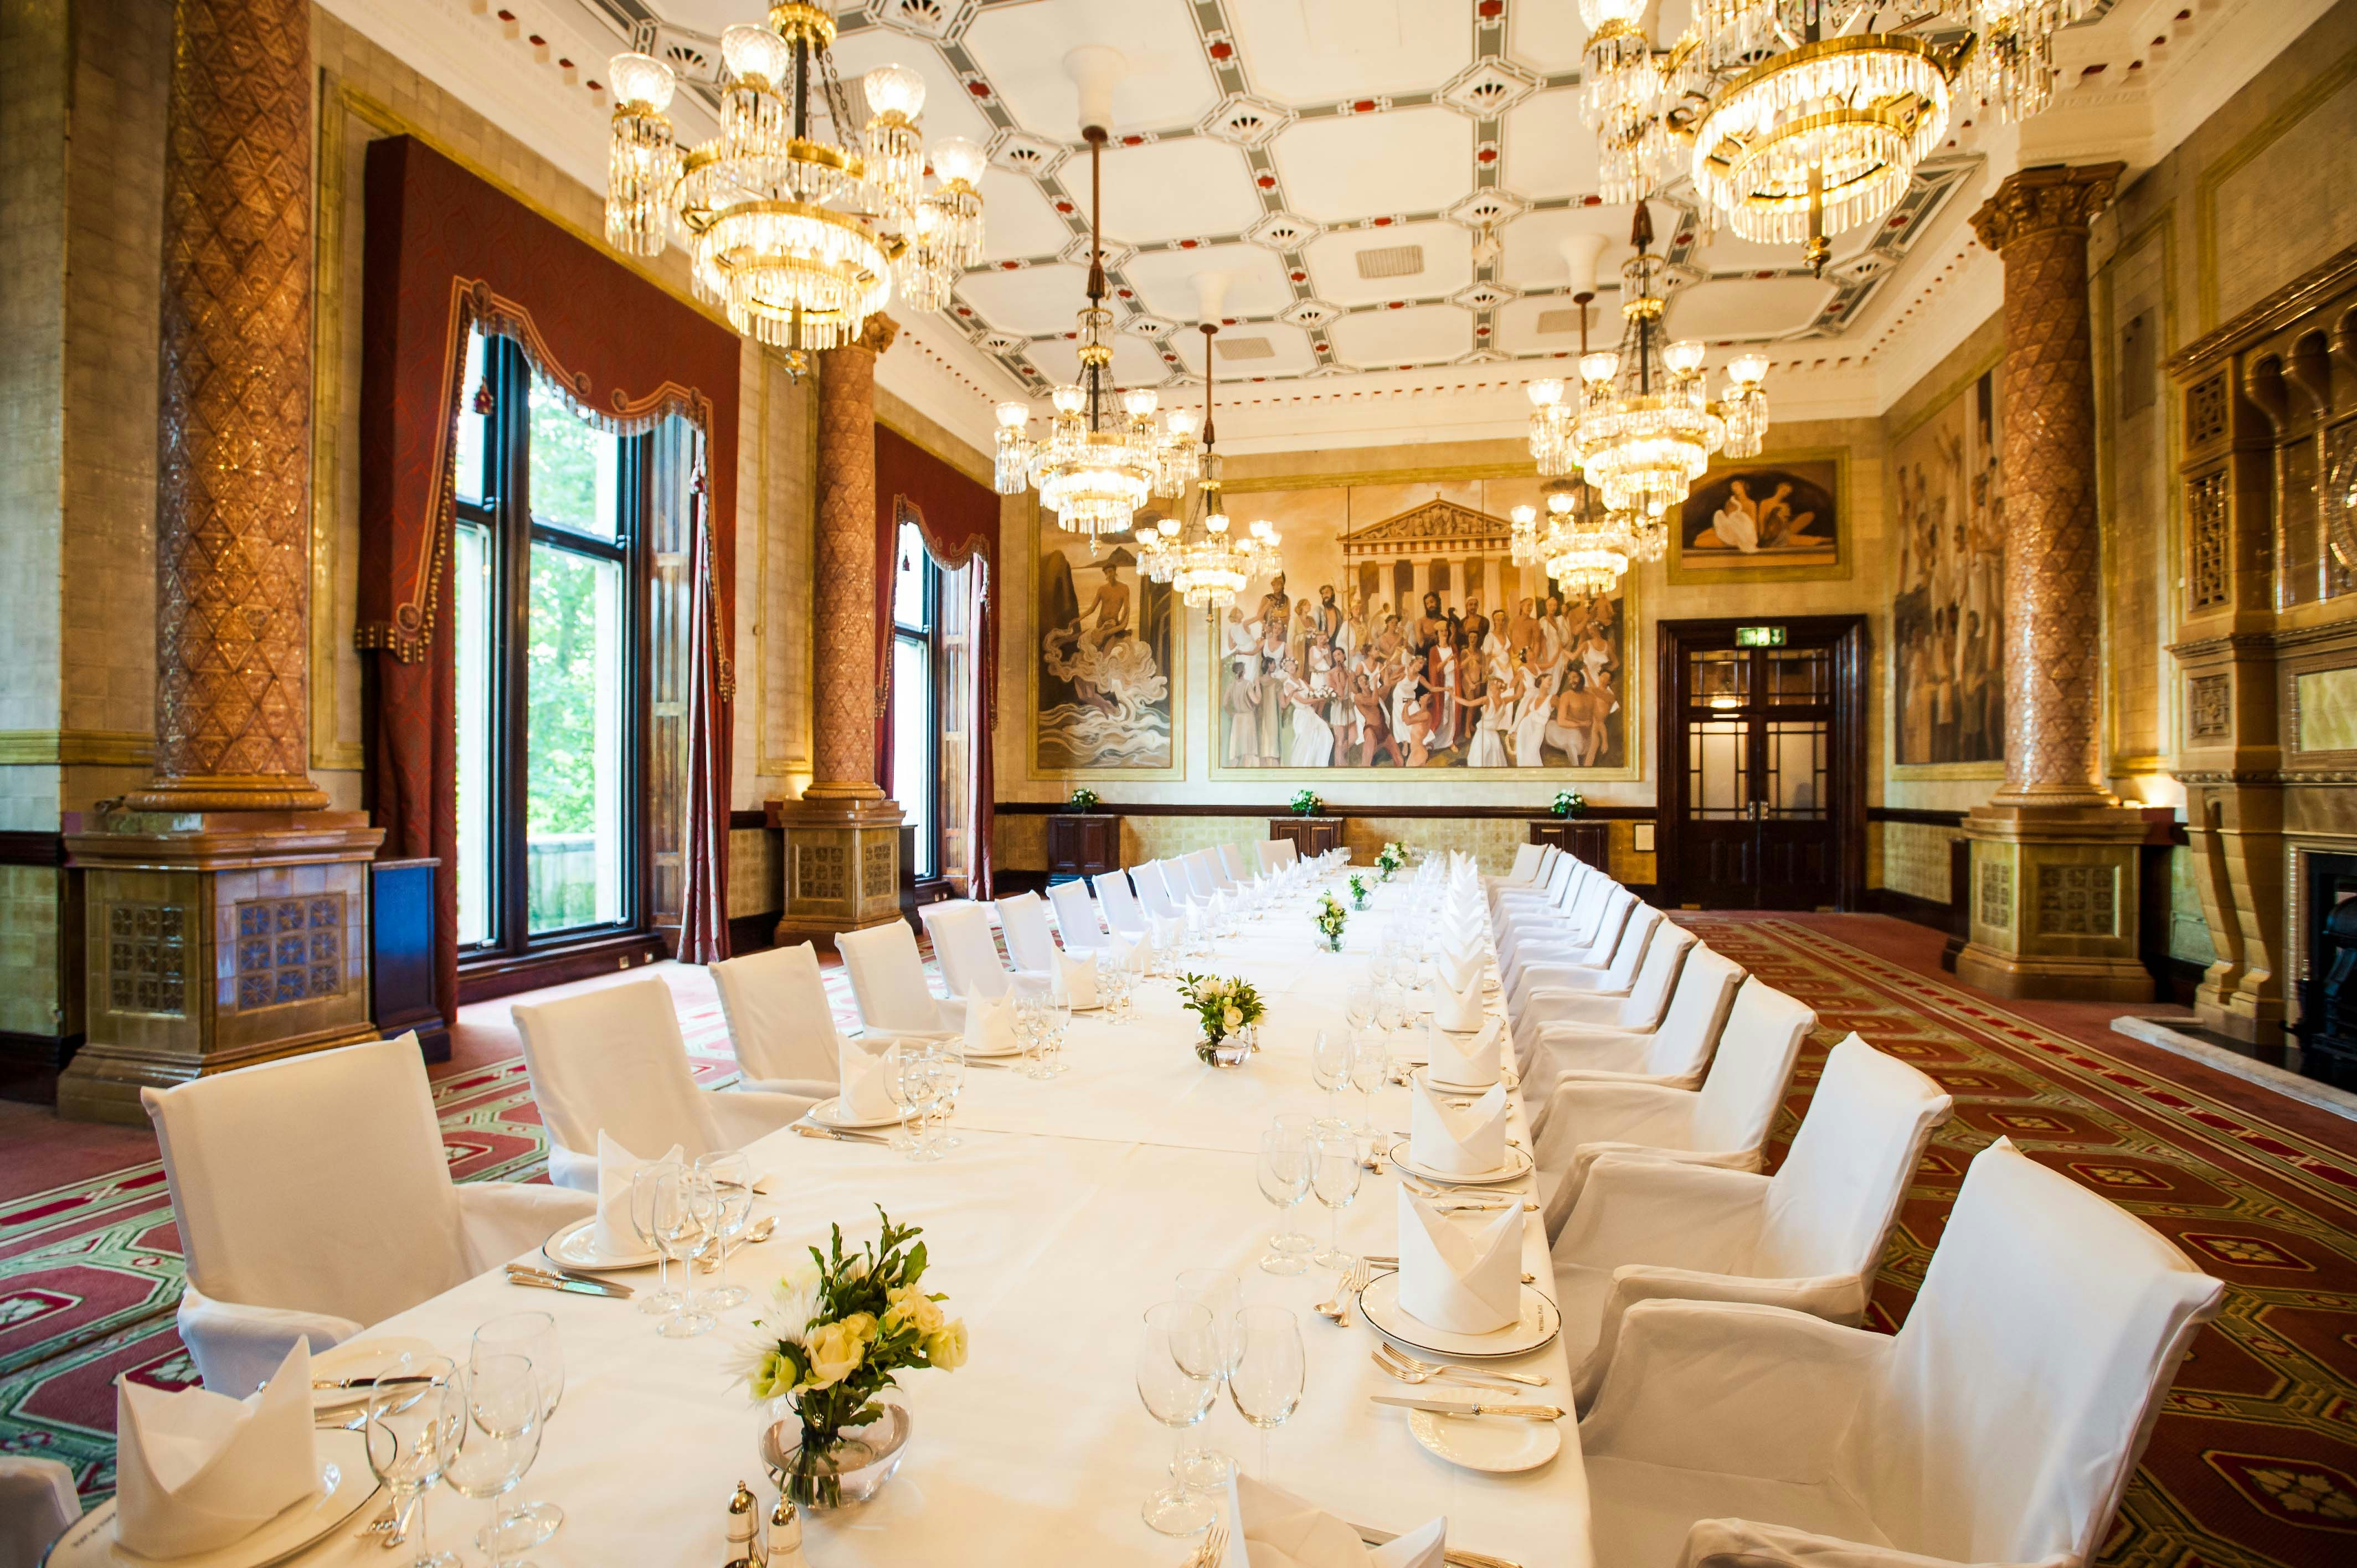 Wedding Licensed Venues in London - The Royal Horseguards Hotel and One Whitehall Place